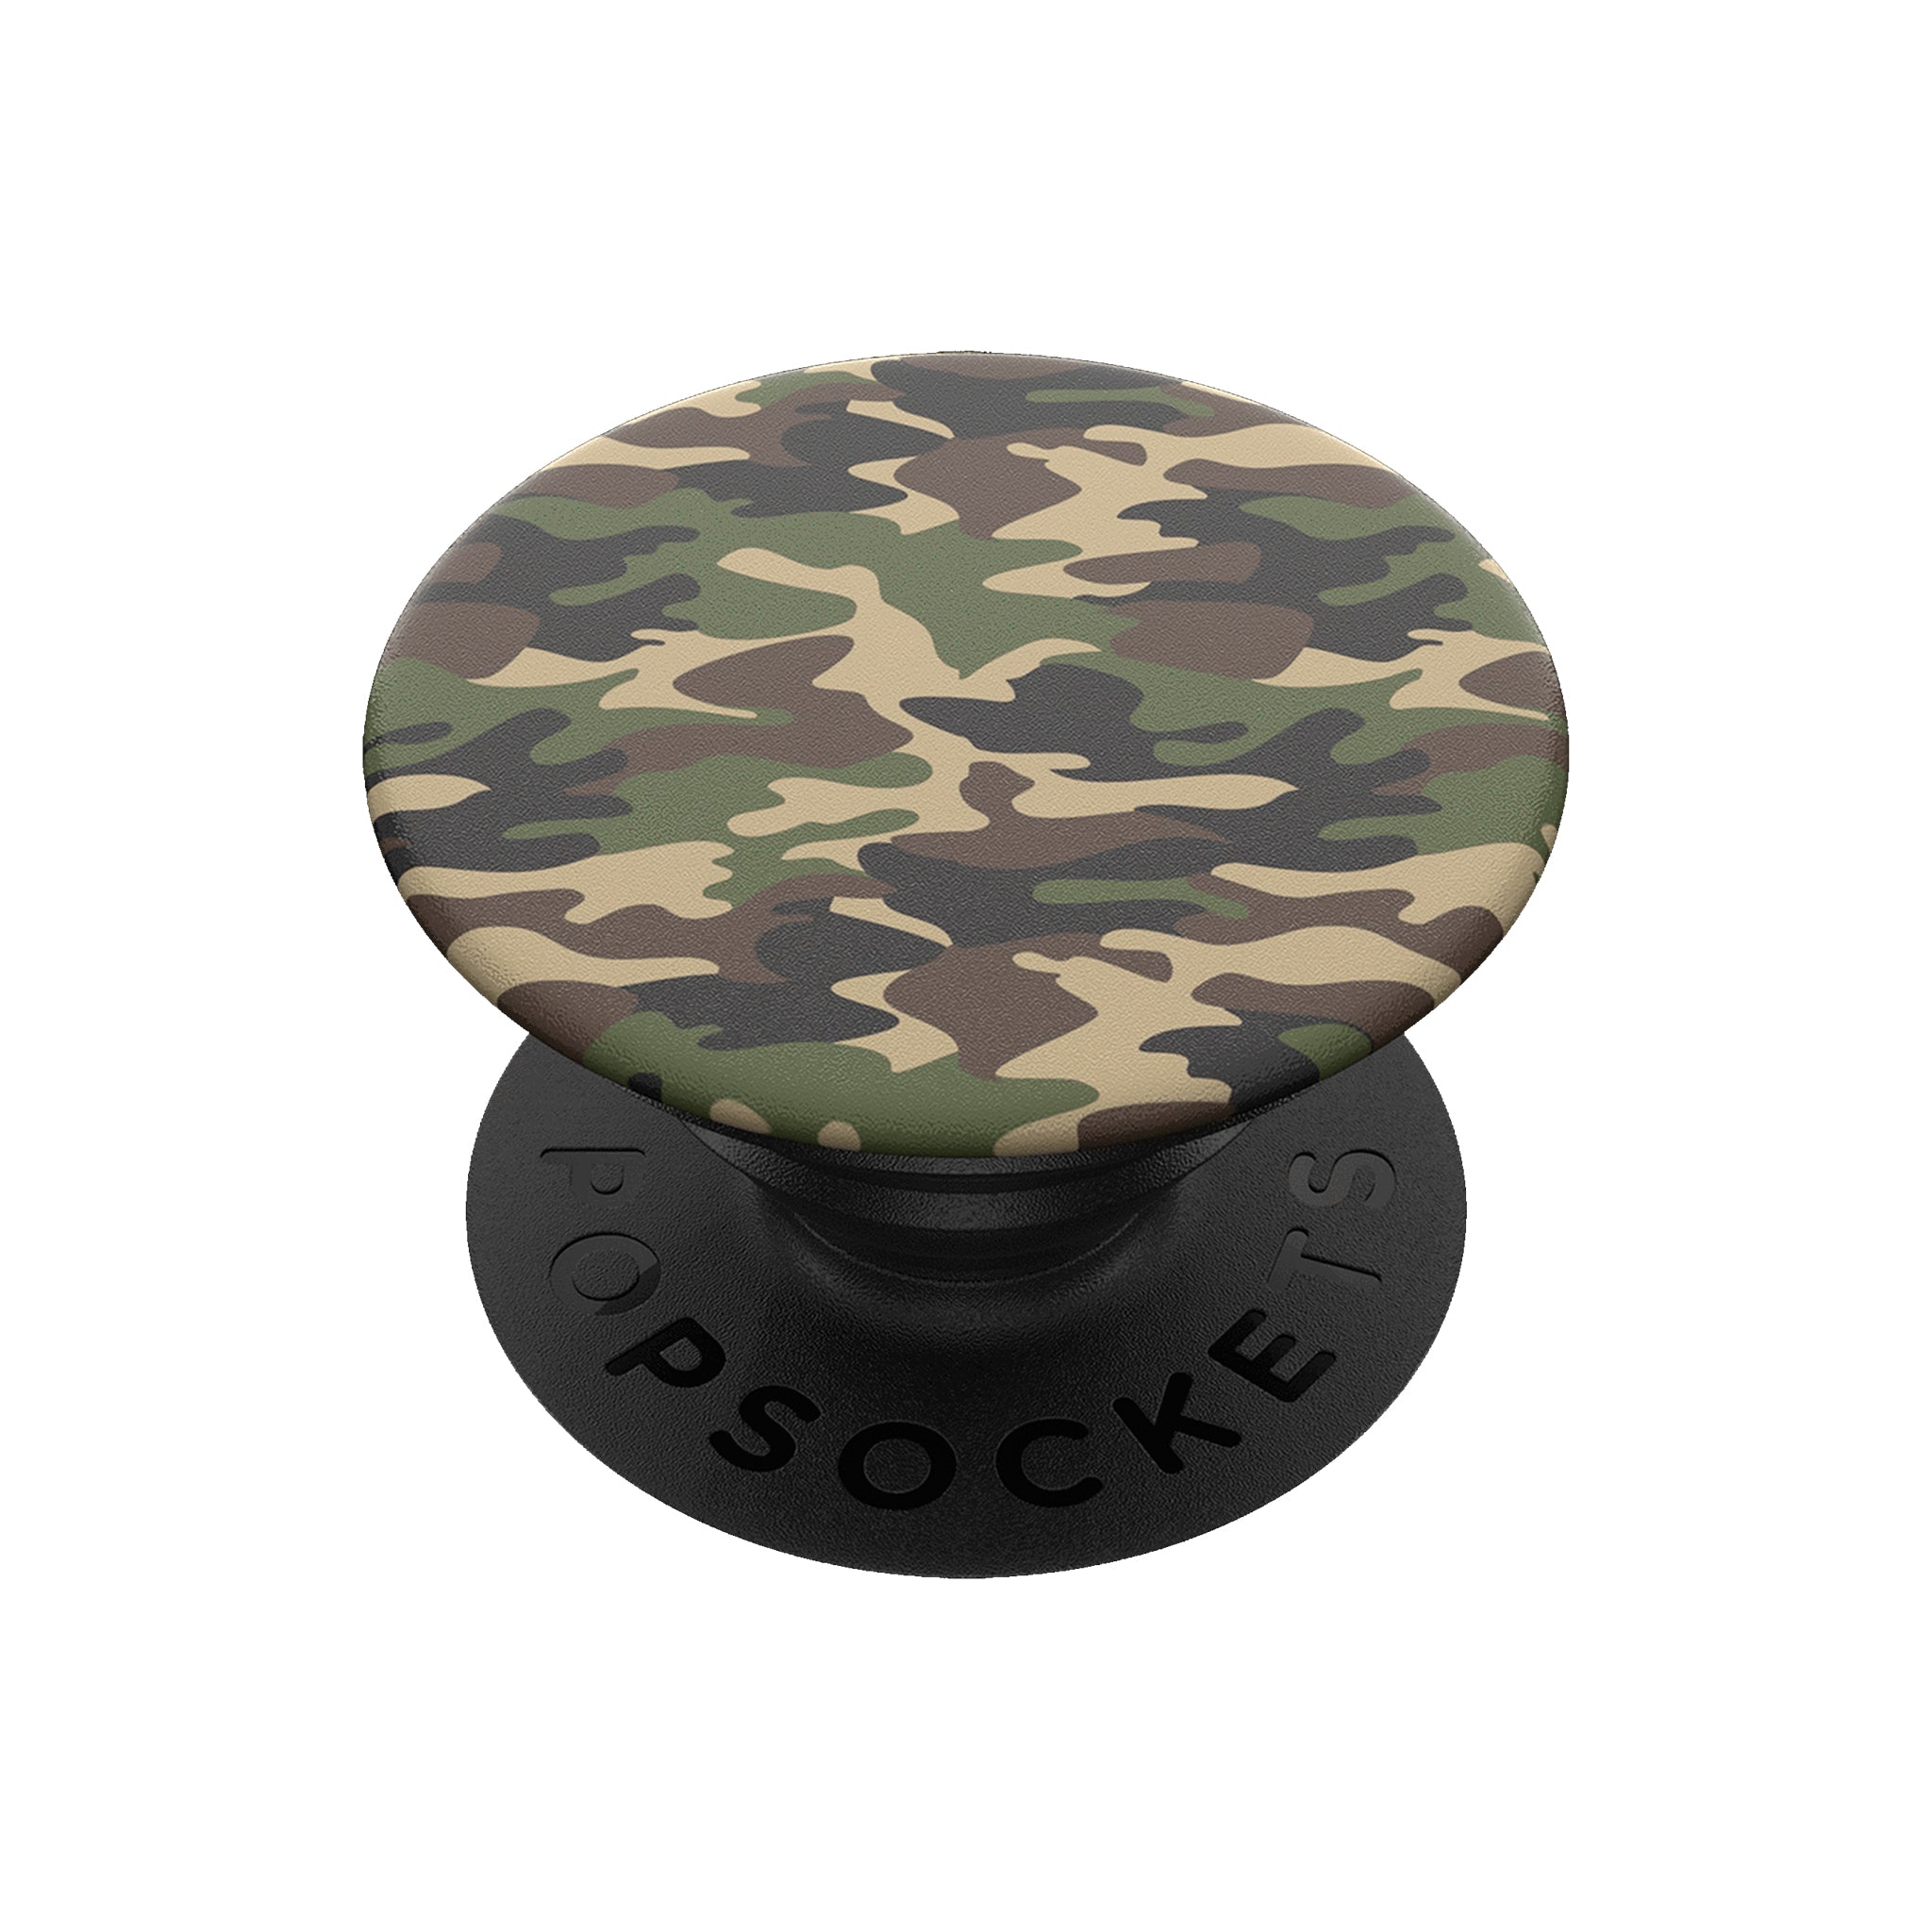 Popsockets - Poptop Swappable Device Stand And Grip Topper - Woodland Camo